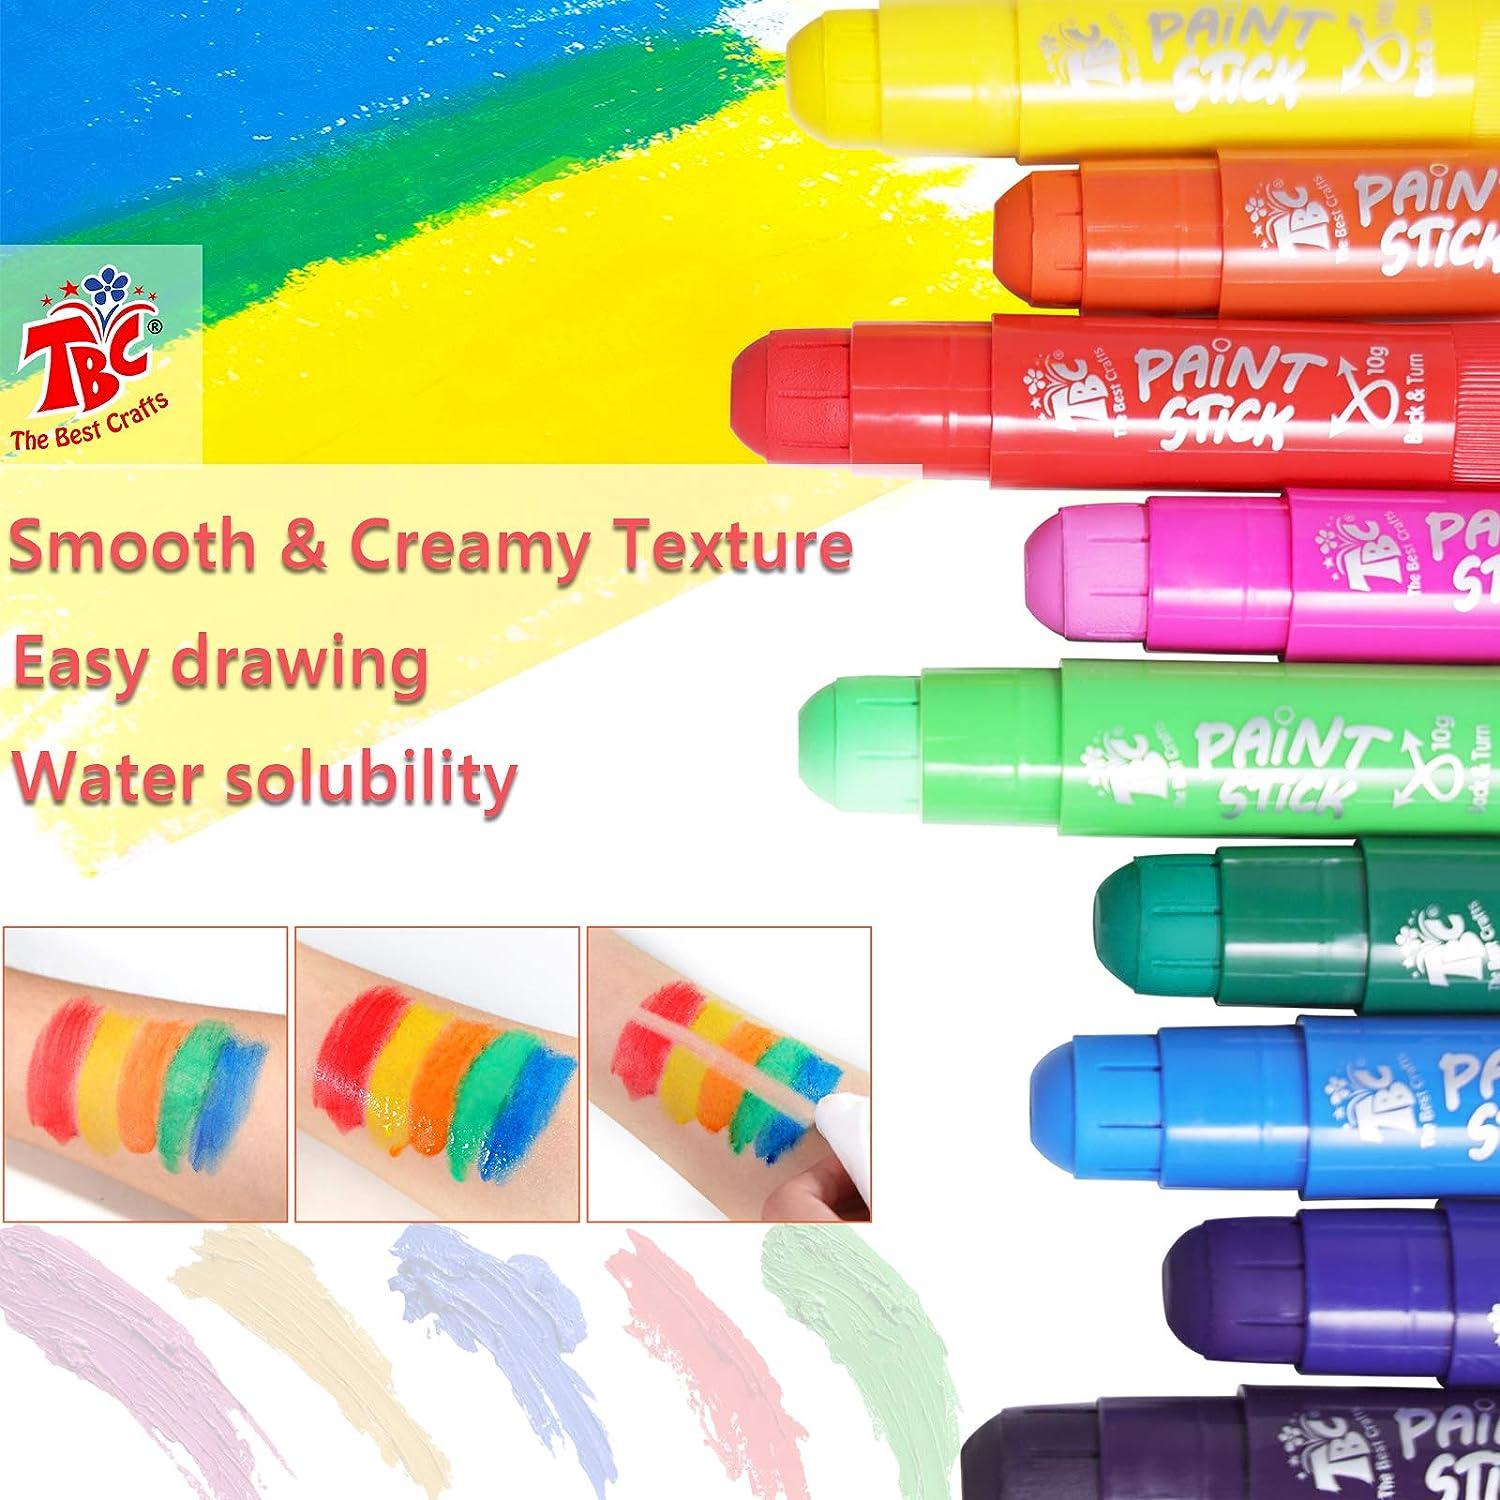 TBC The Best Crafts Finger Crayon,16 Vibrant Colors,Washable and Non-Toxic,Baby Finger Paint Crayons Sticks